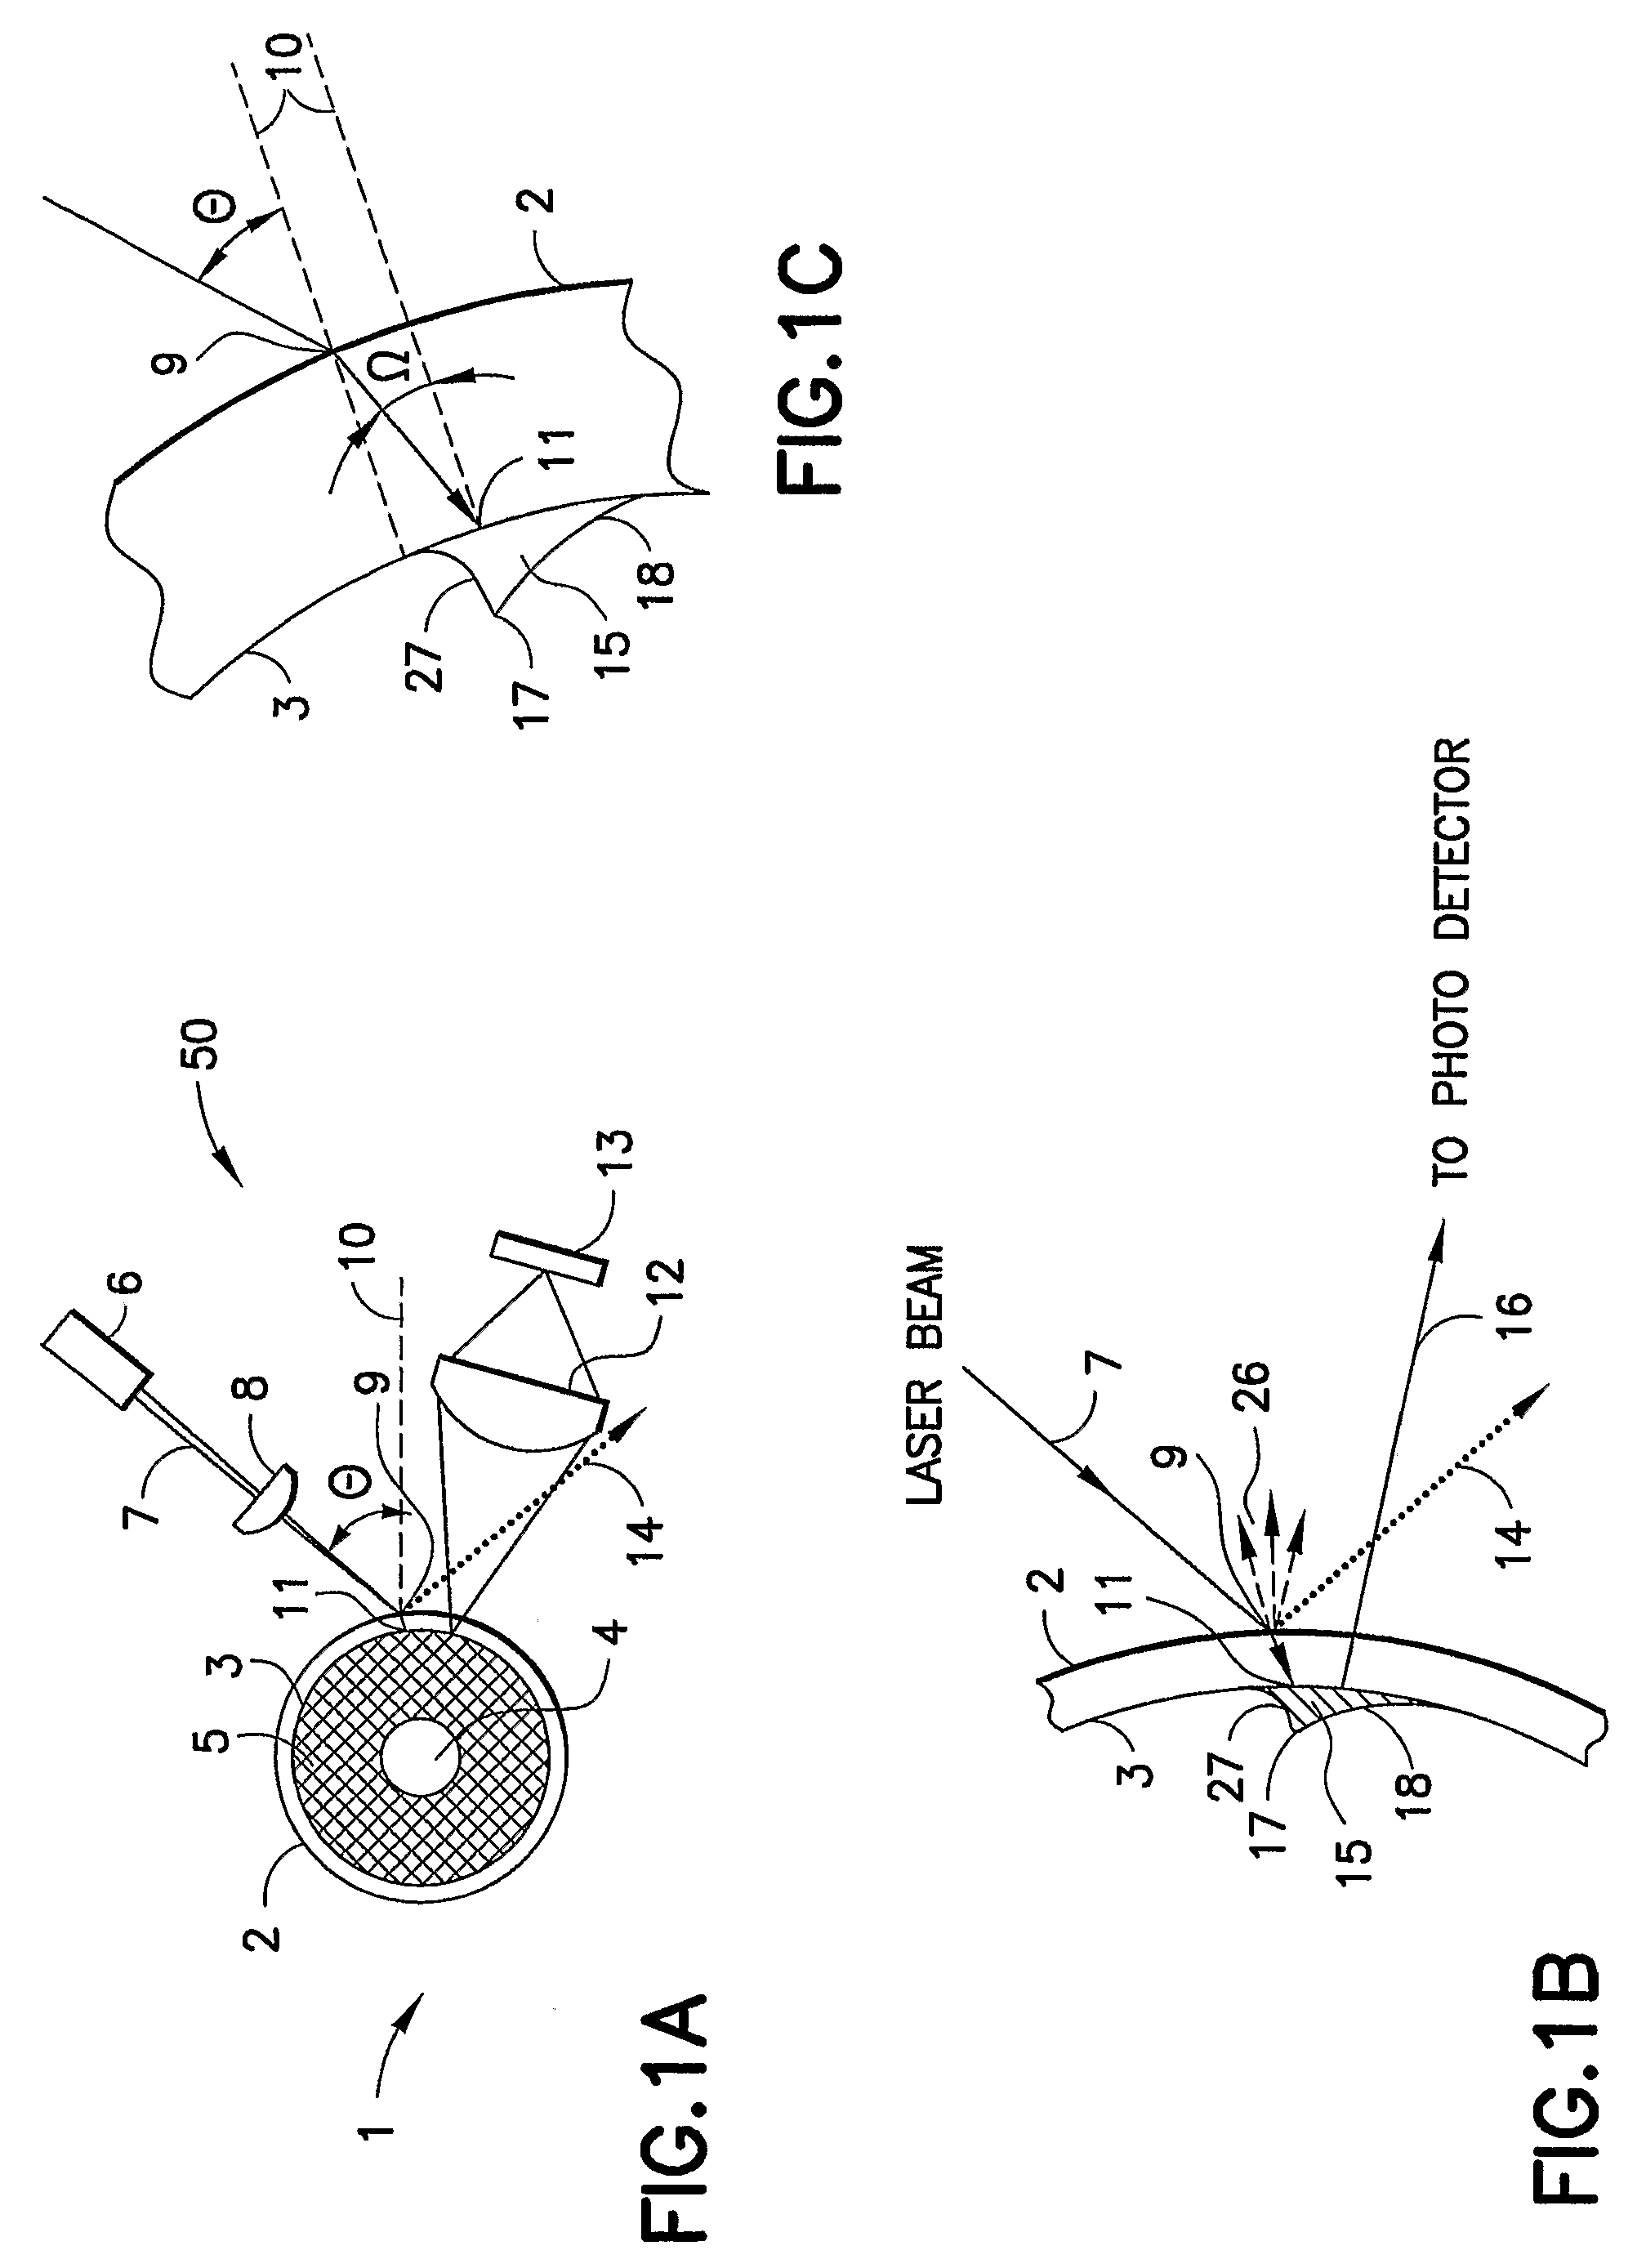 Apparatus for performing optical measurements on blood culture bottles